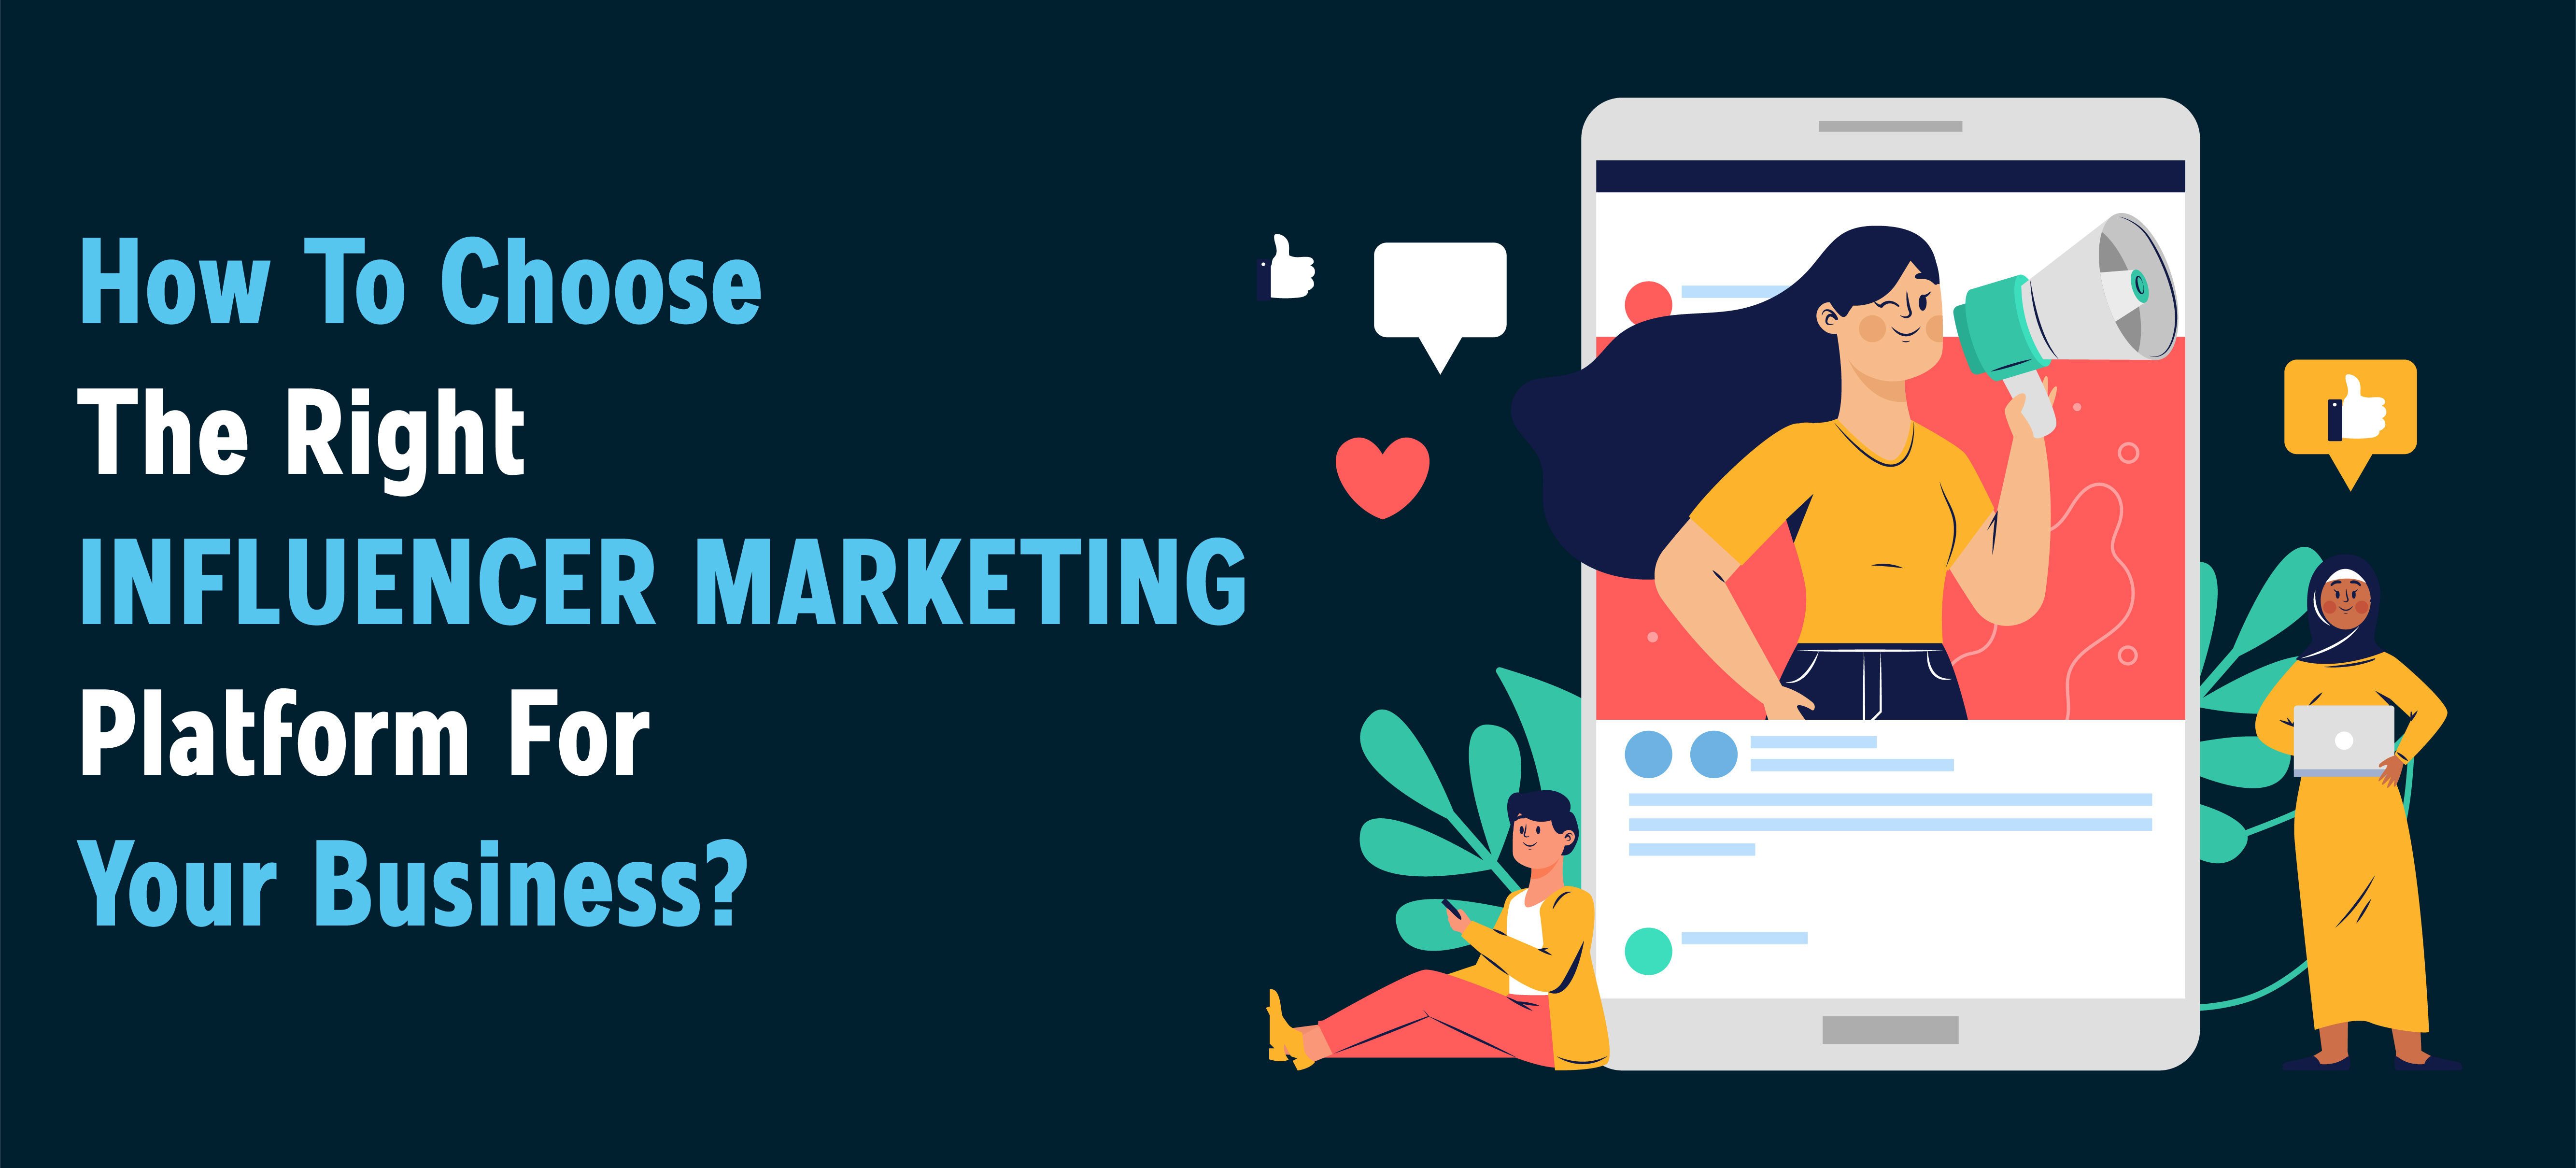 How To Choose The Right Influencer Marketing Platform For Your Business?